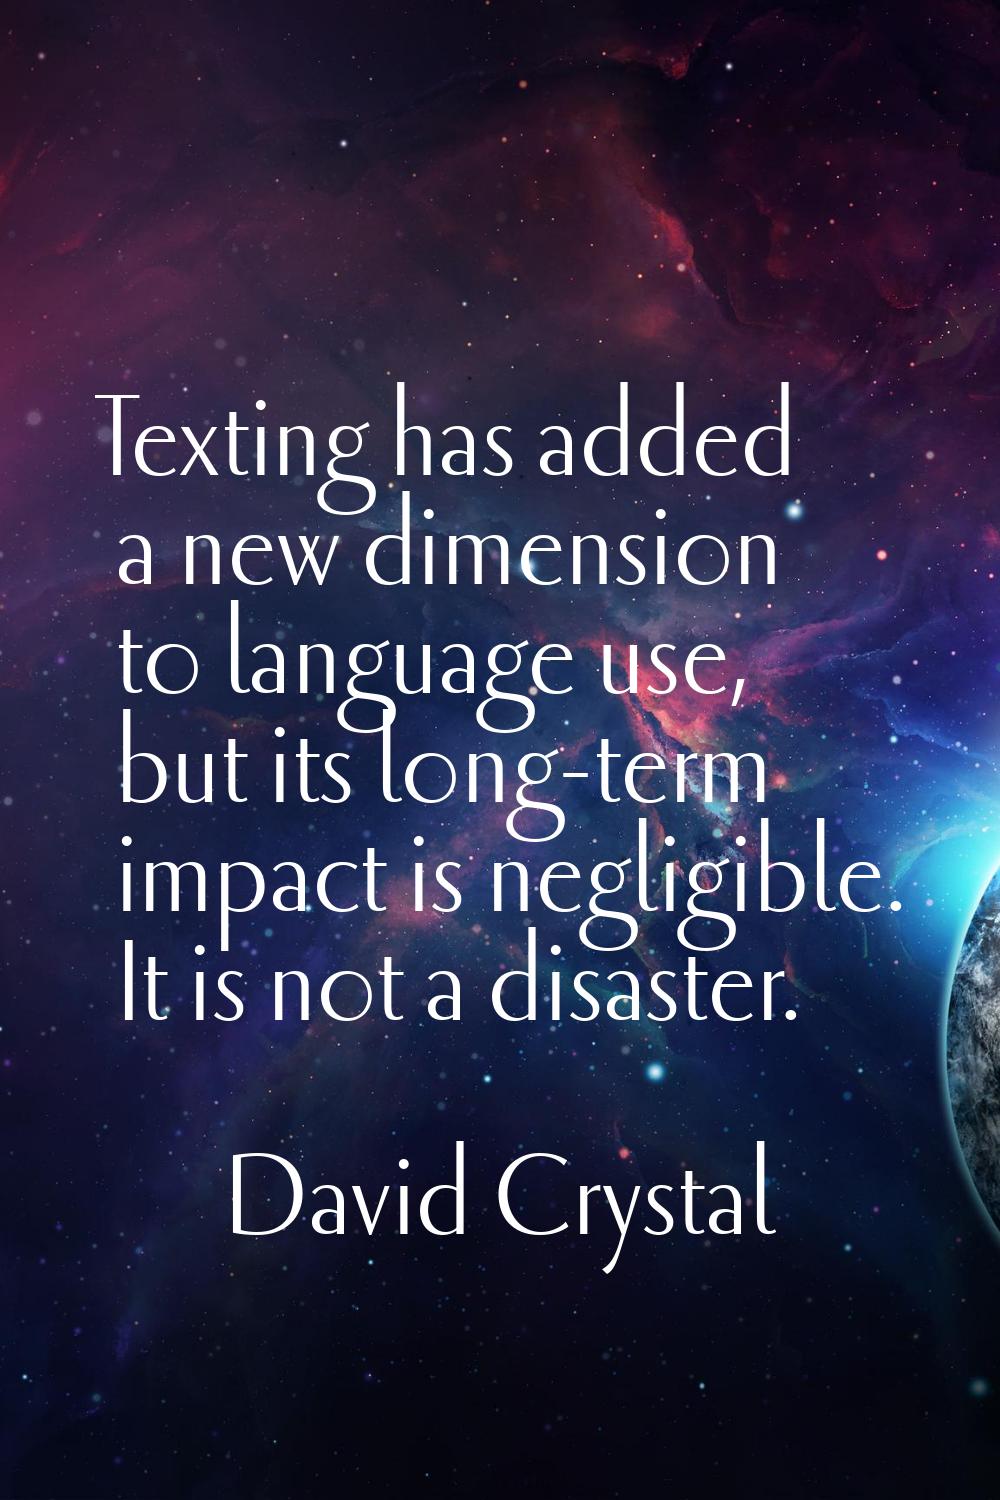 Texting has added a new dimension to language use, but its long-term impact is negligible. It is no